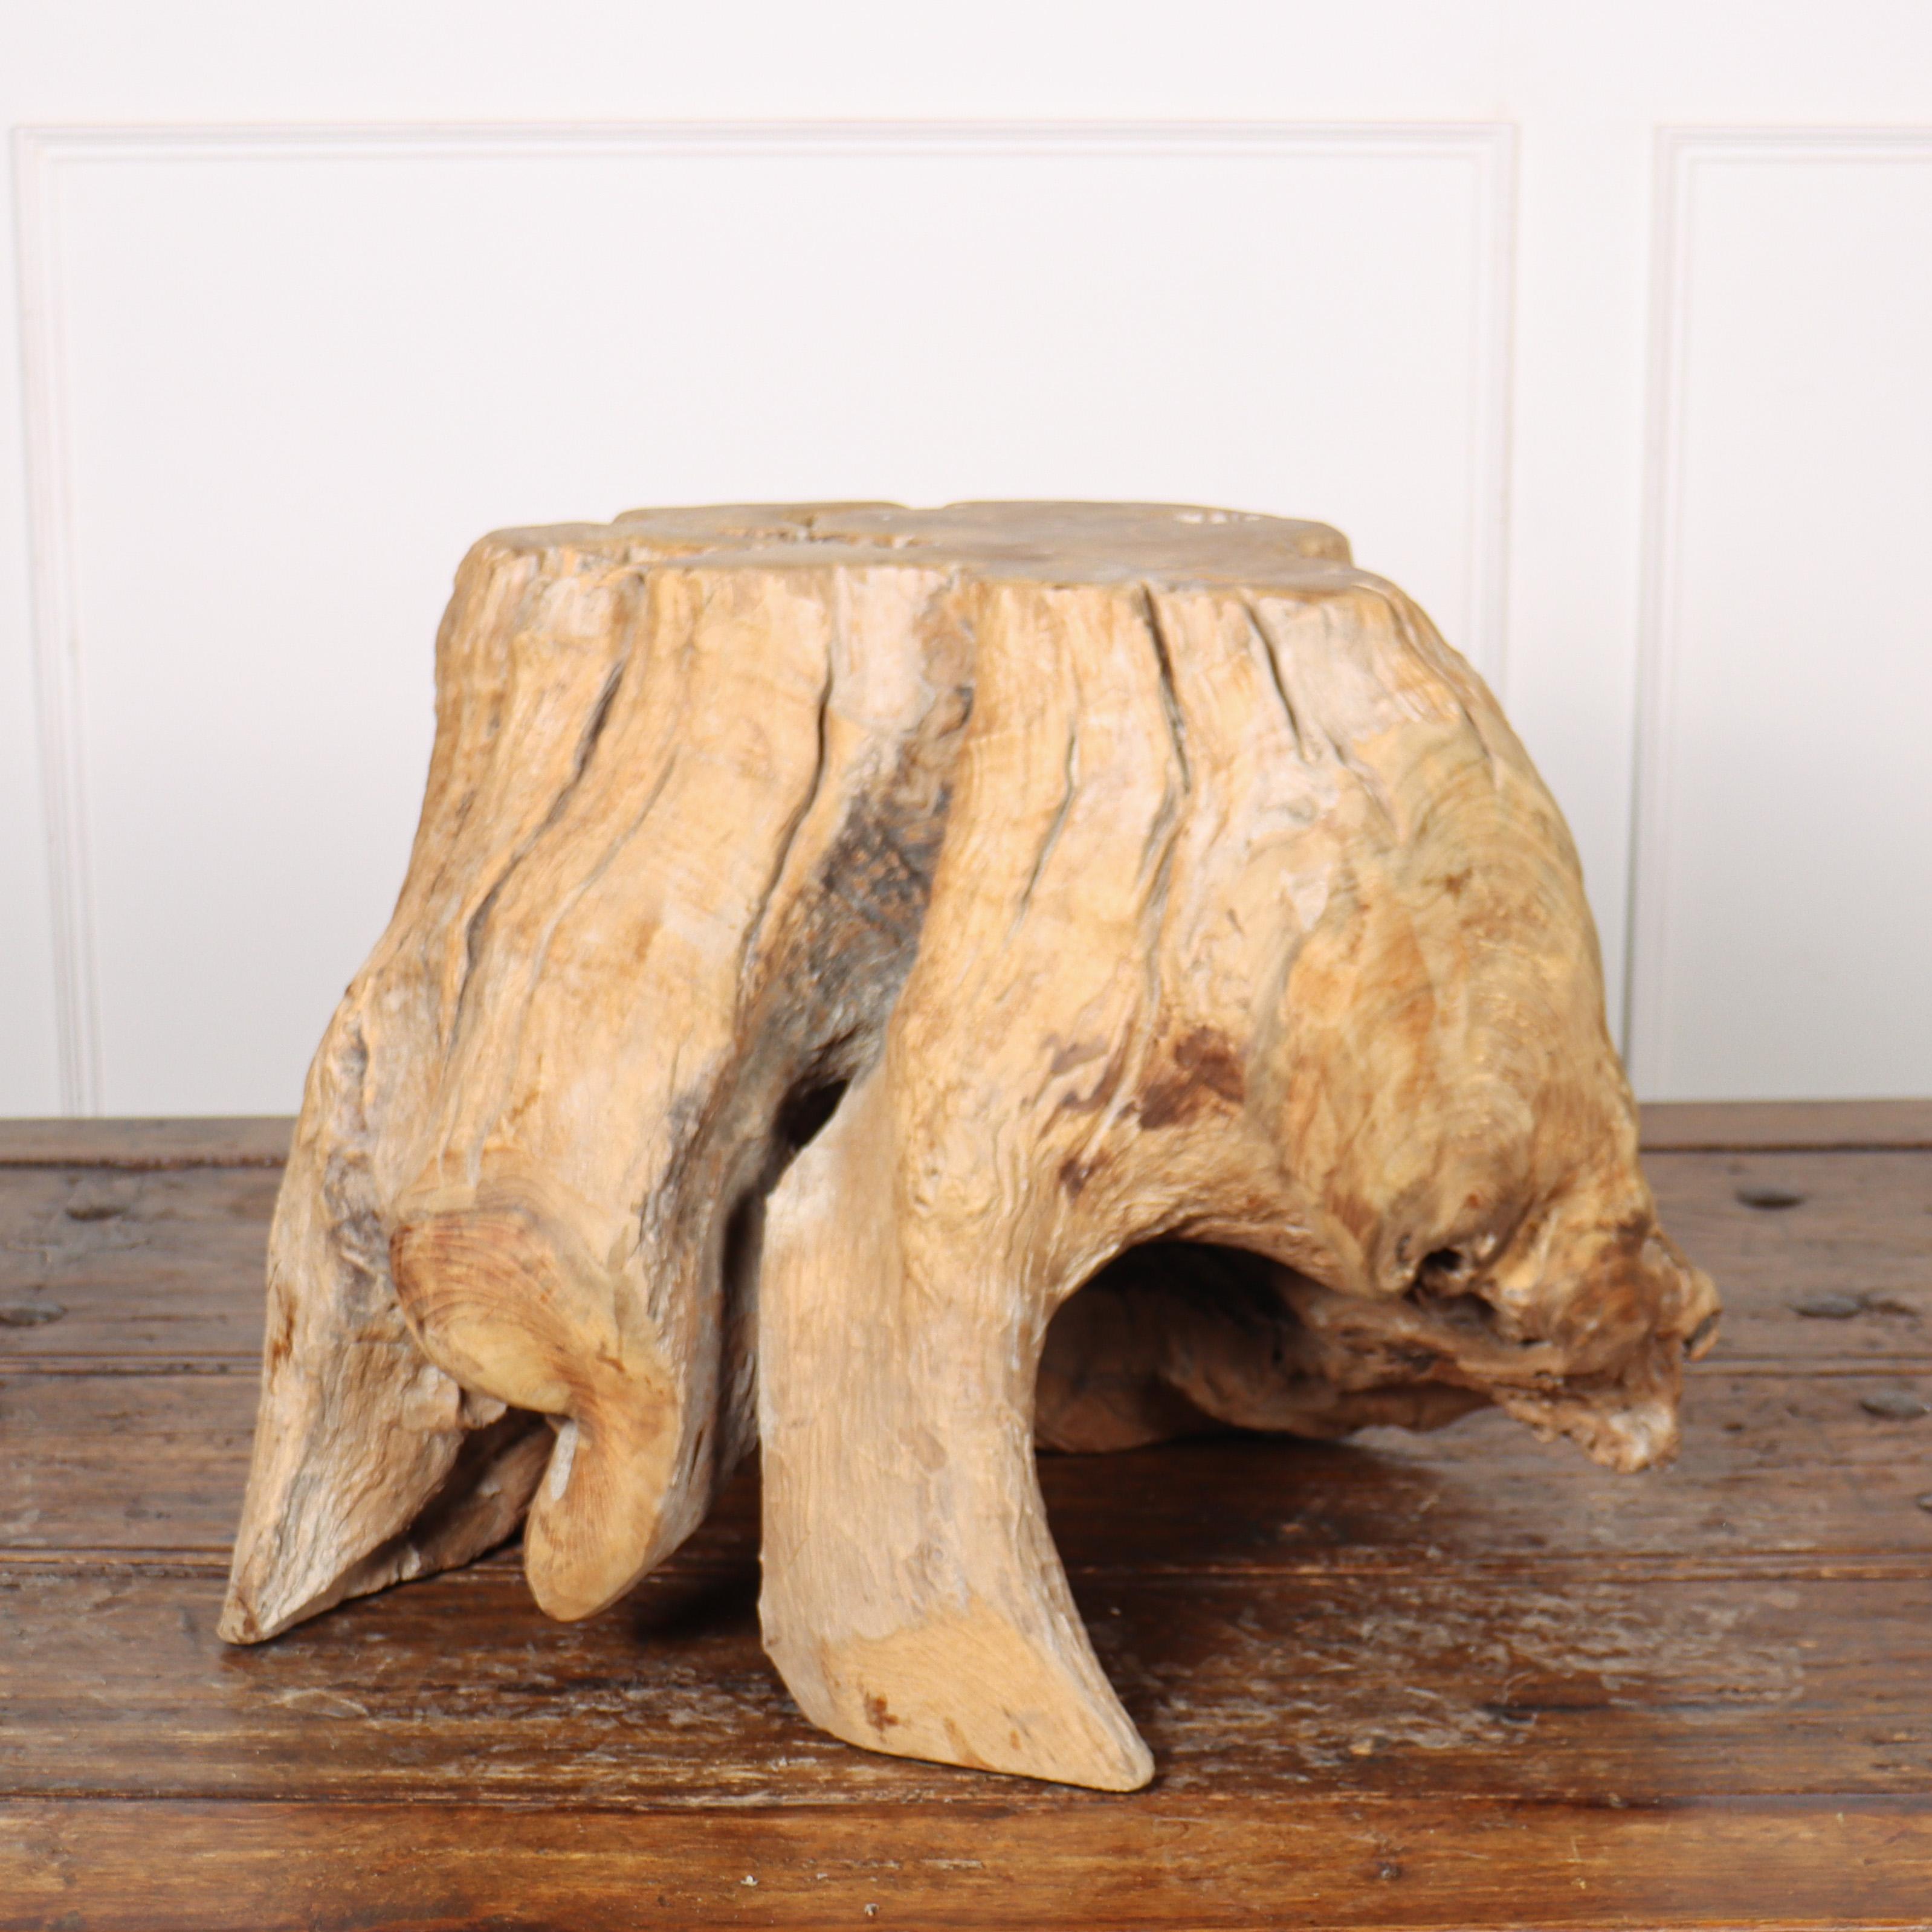 Sculptural rustic root side table.

Ref: D.

Reference: 8147

Dimensions
26 inches (66 cms) Wide
22 inches (56 cms) Deep
18.5 inches (47 cms) High